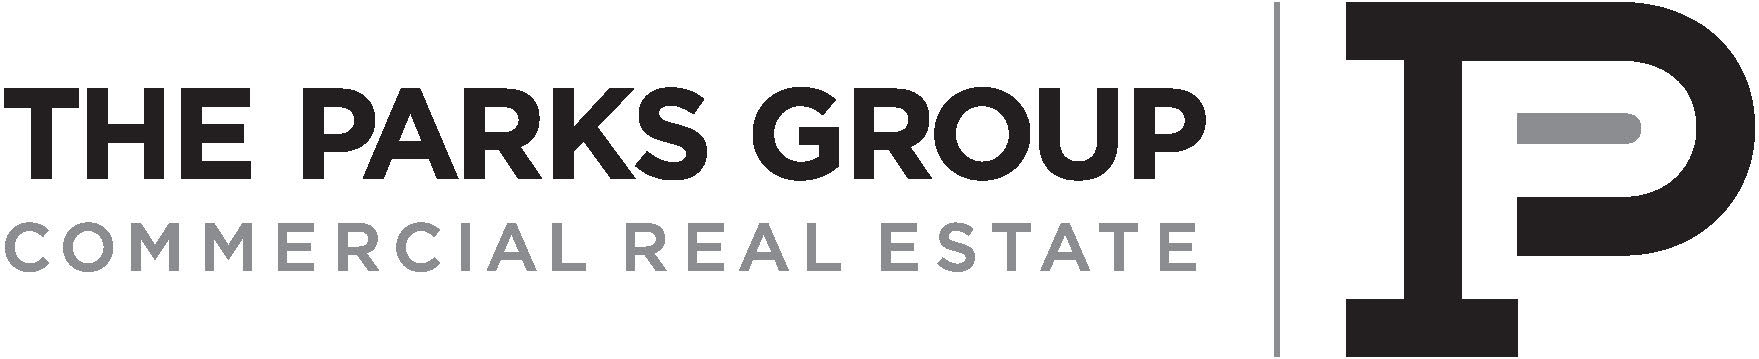 The Parks Group